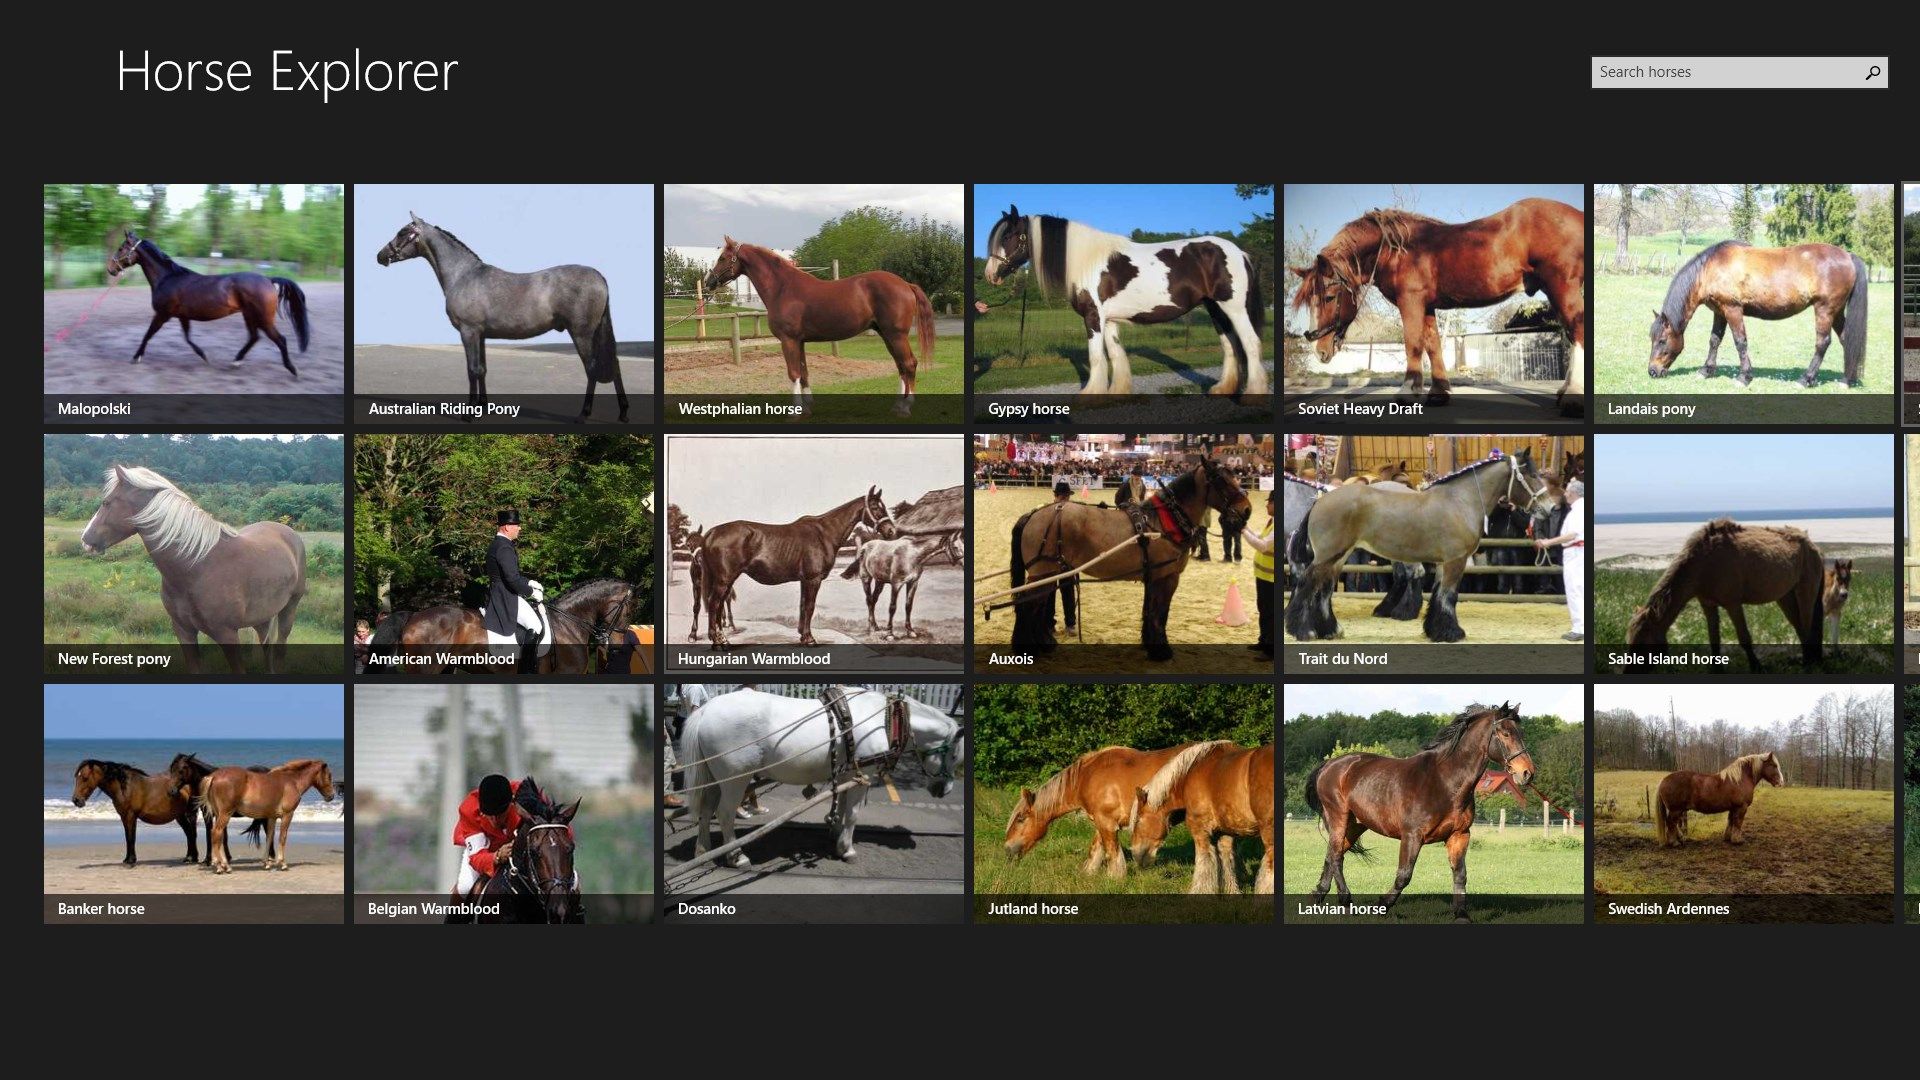 A quick and handy reference for looking up horses and ponies!